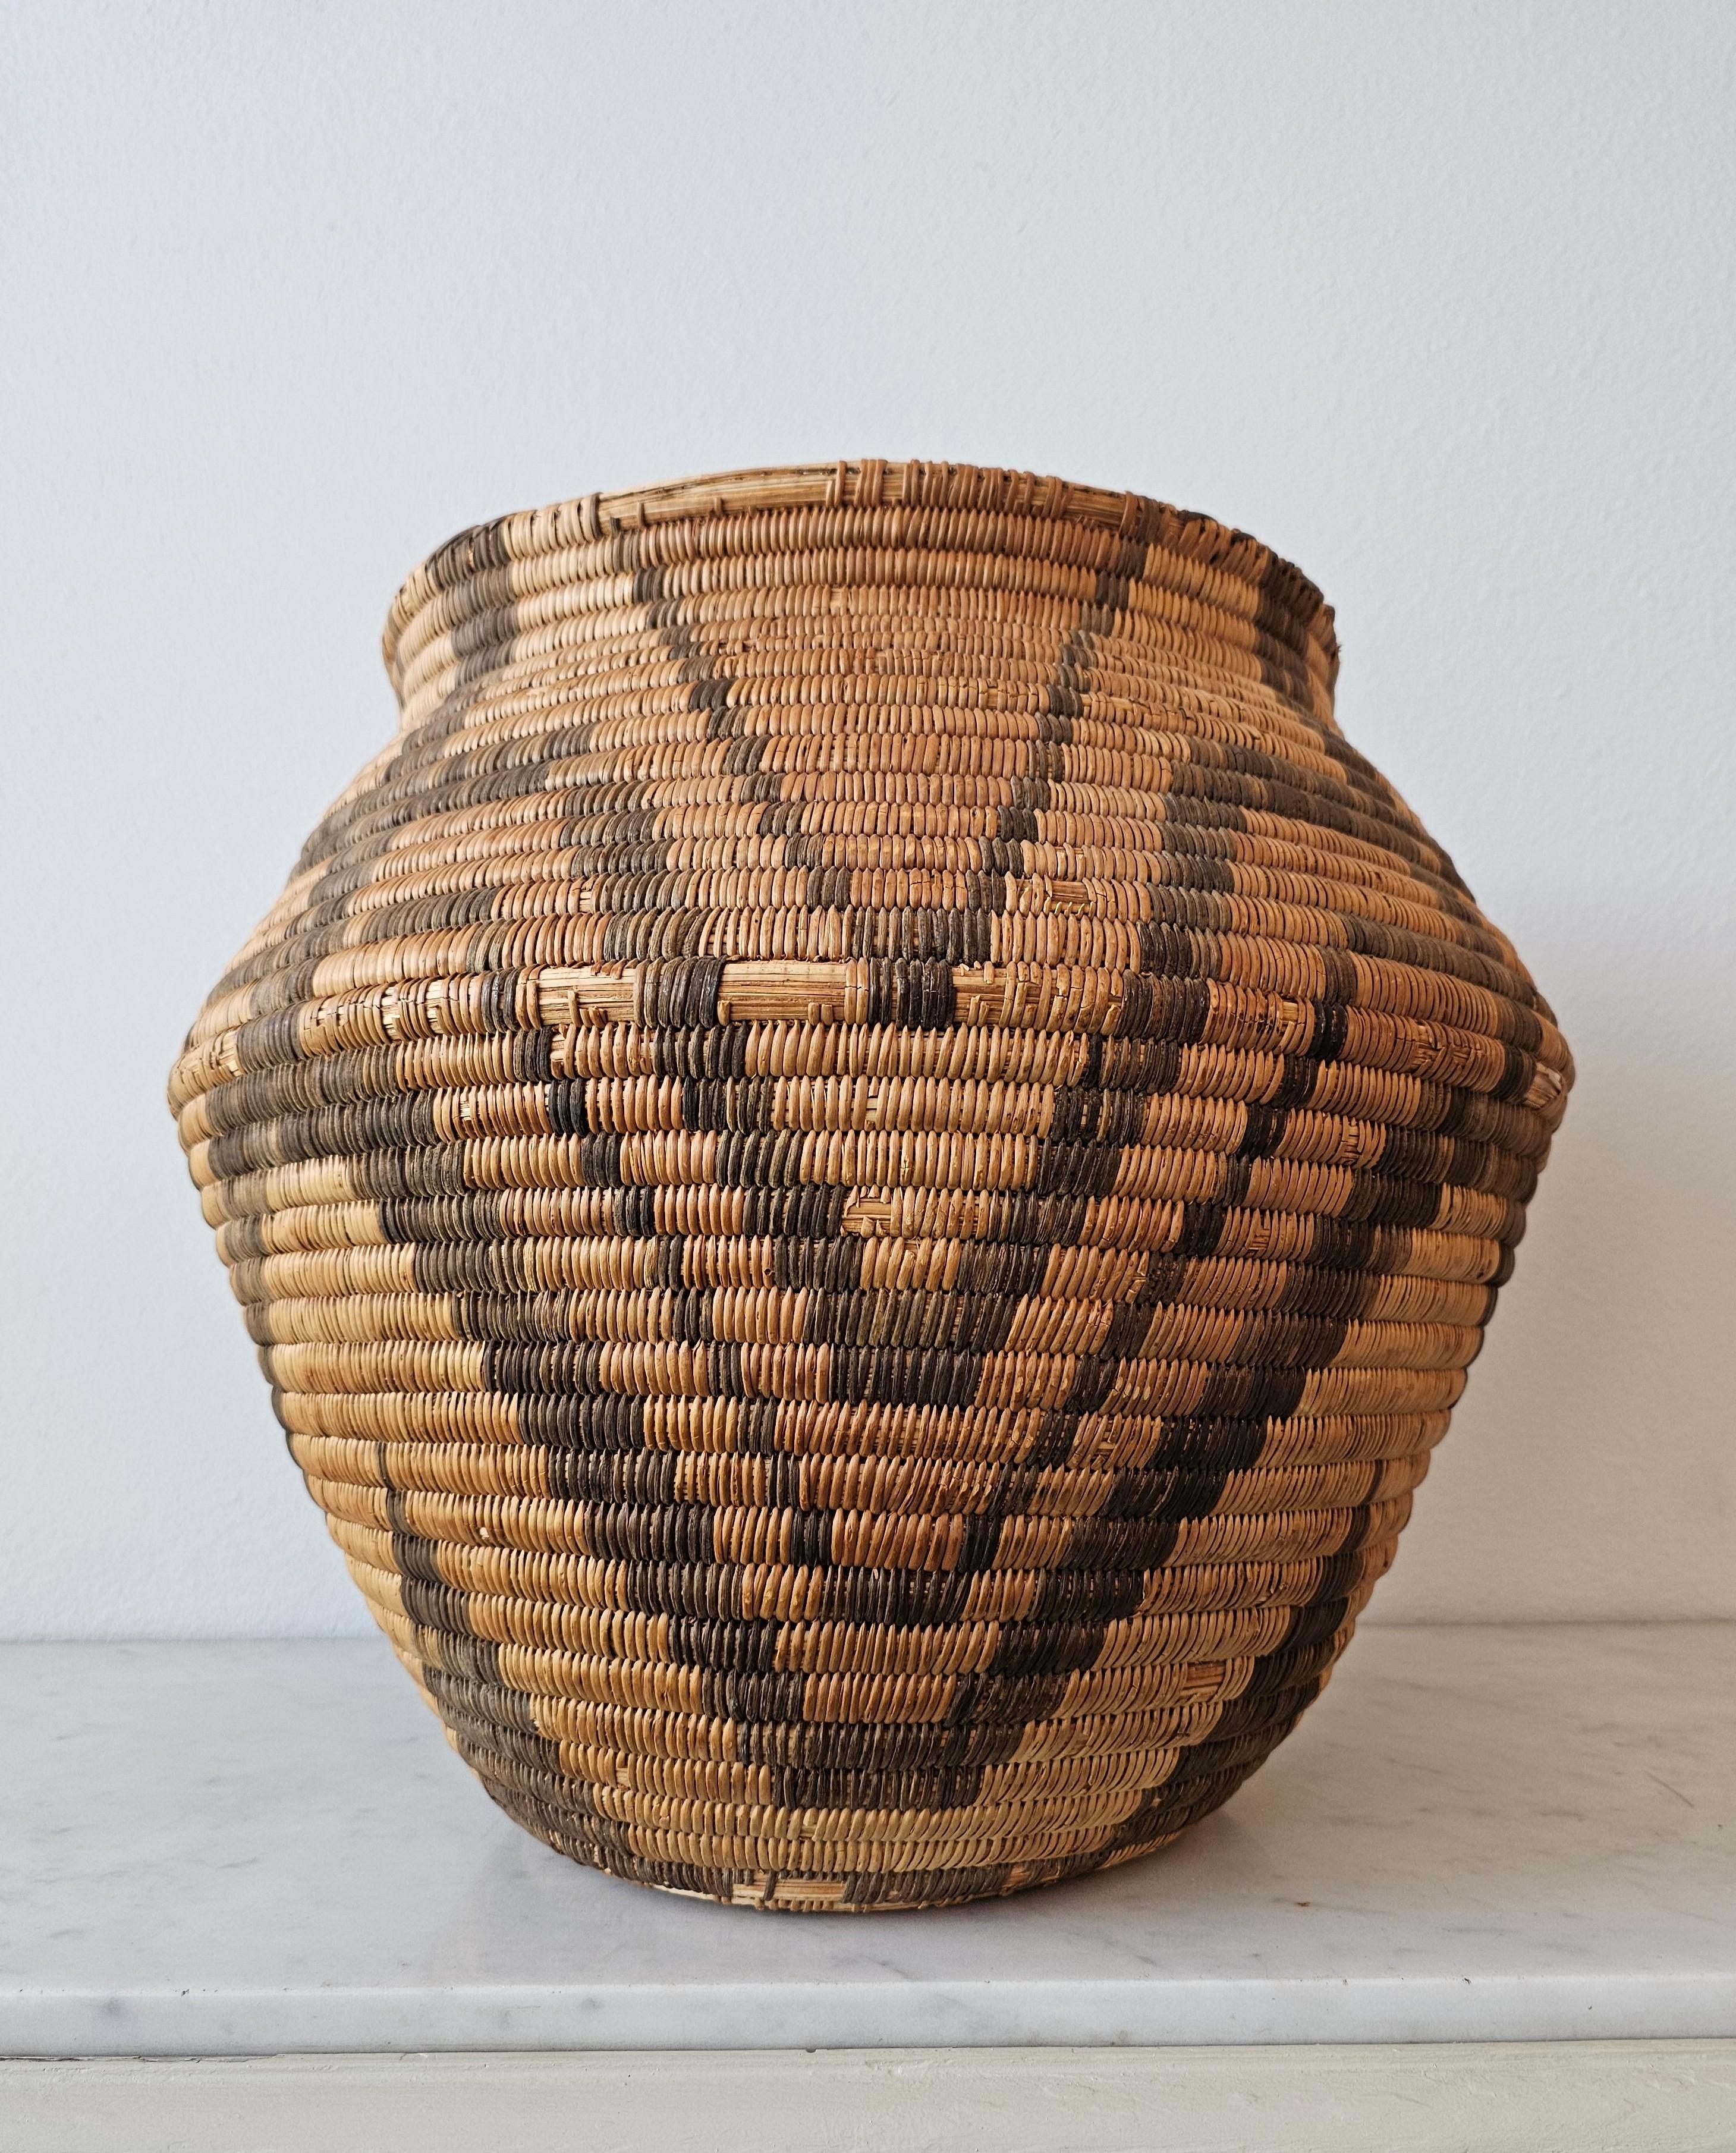 Antique Apache Olla Jar Coiled Willow Wicker Devil's Claw Basket  For Sale 1